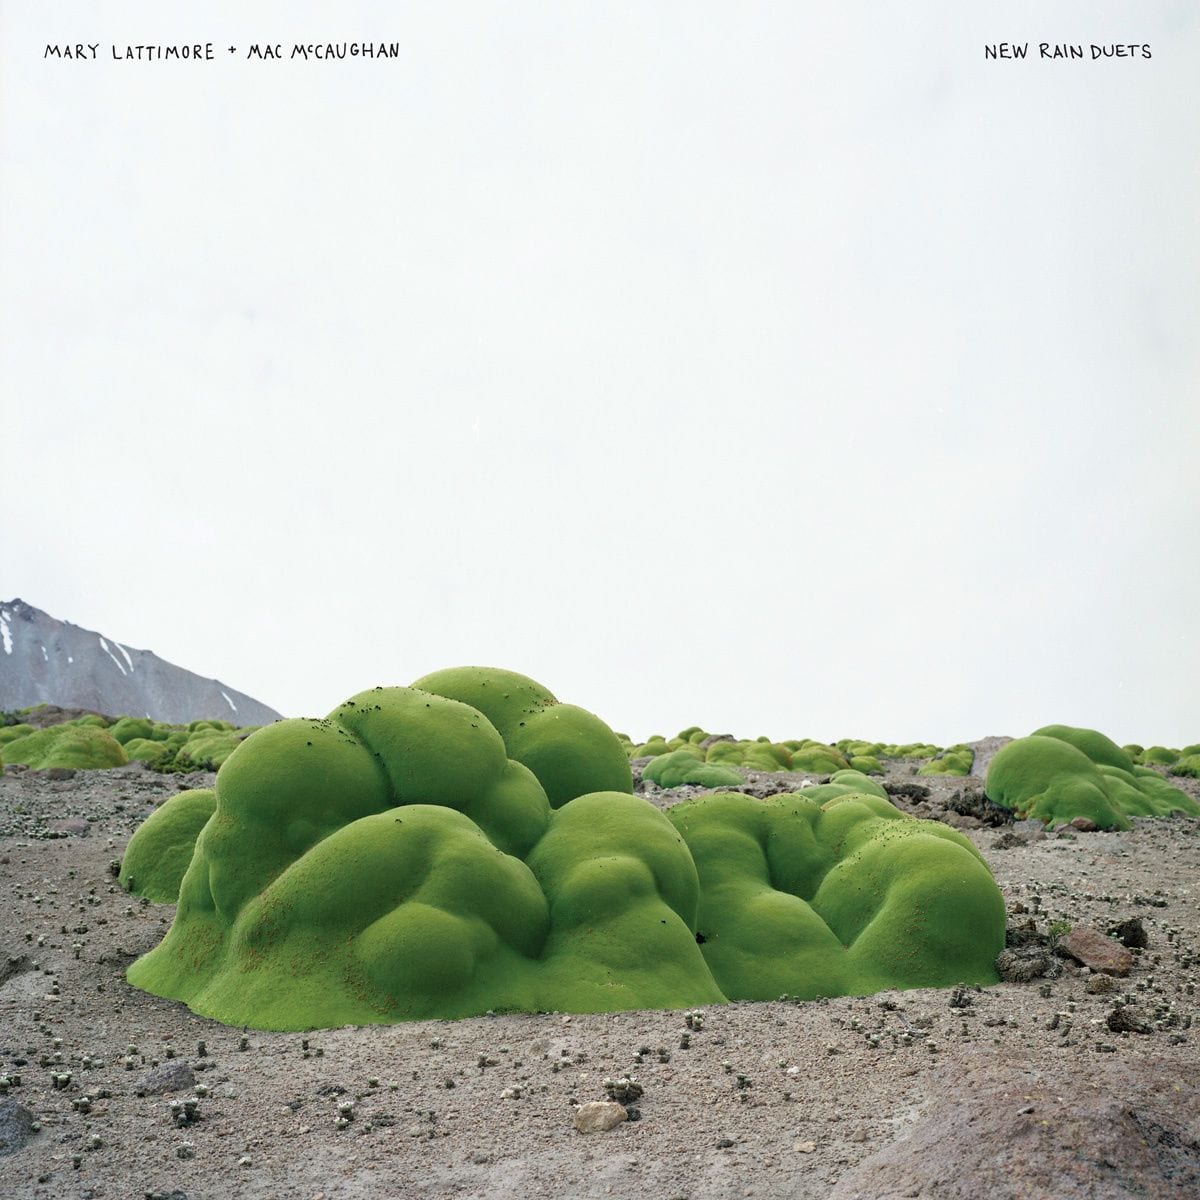 Mary Lattimore and Mac McCaughan Unveil Their Minimal Explorations